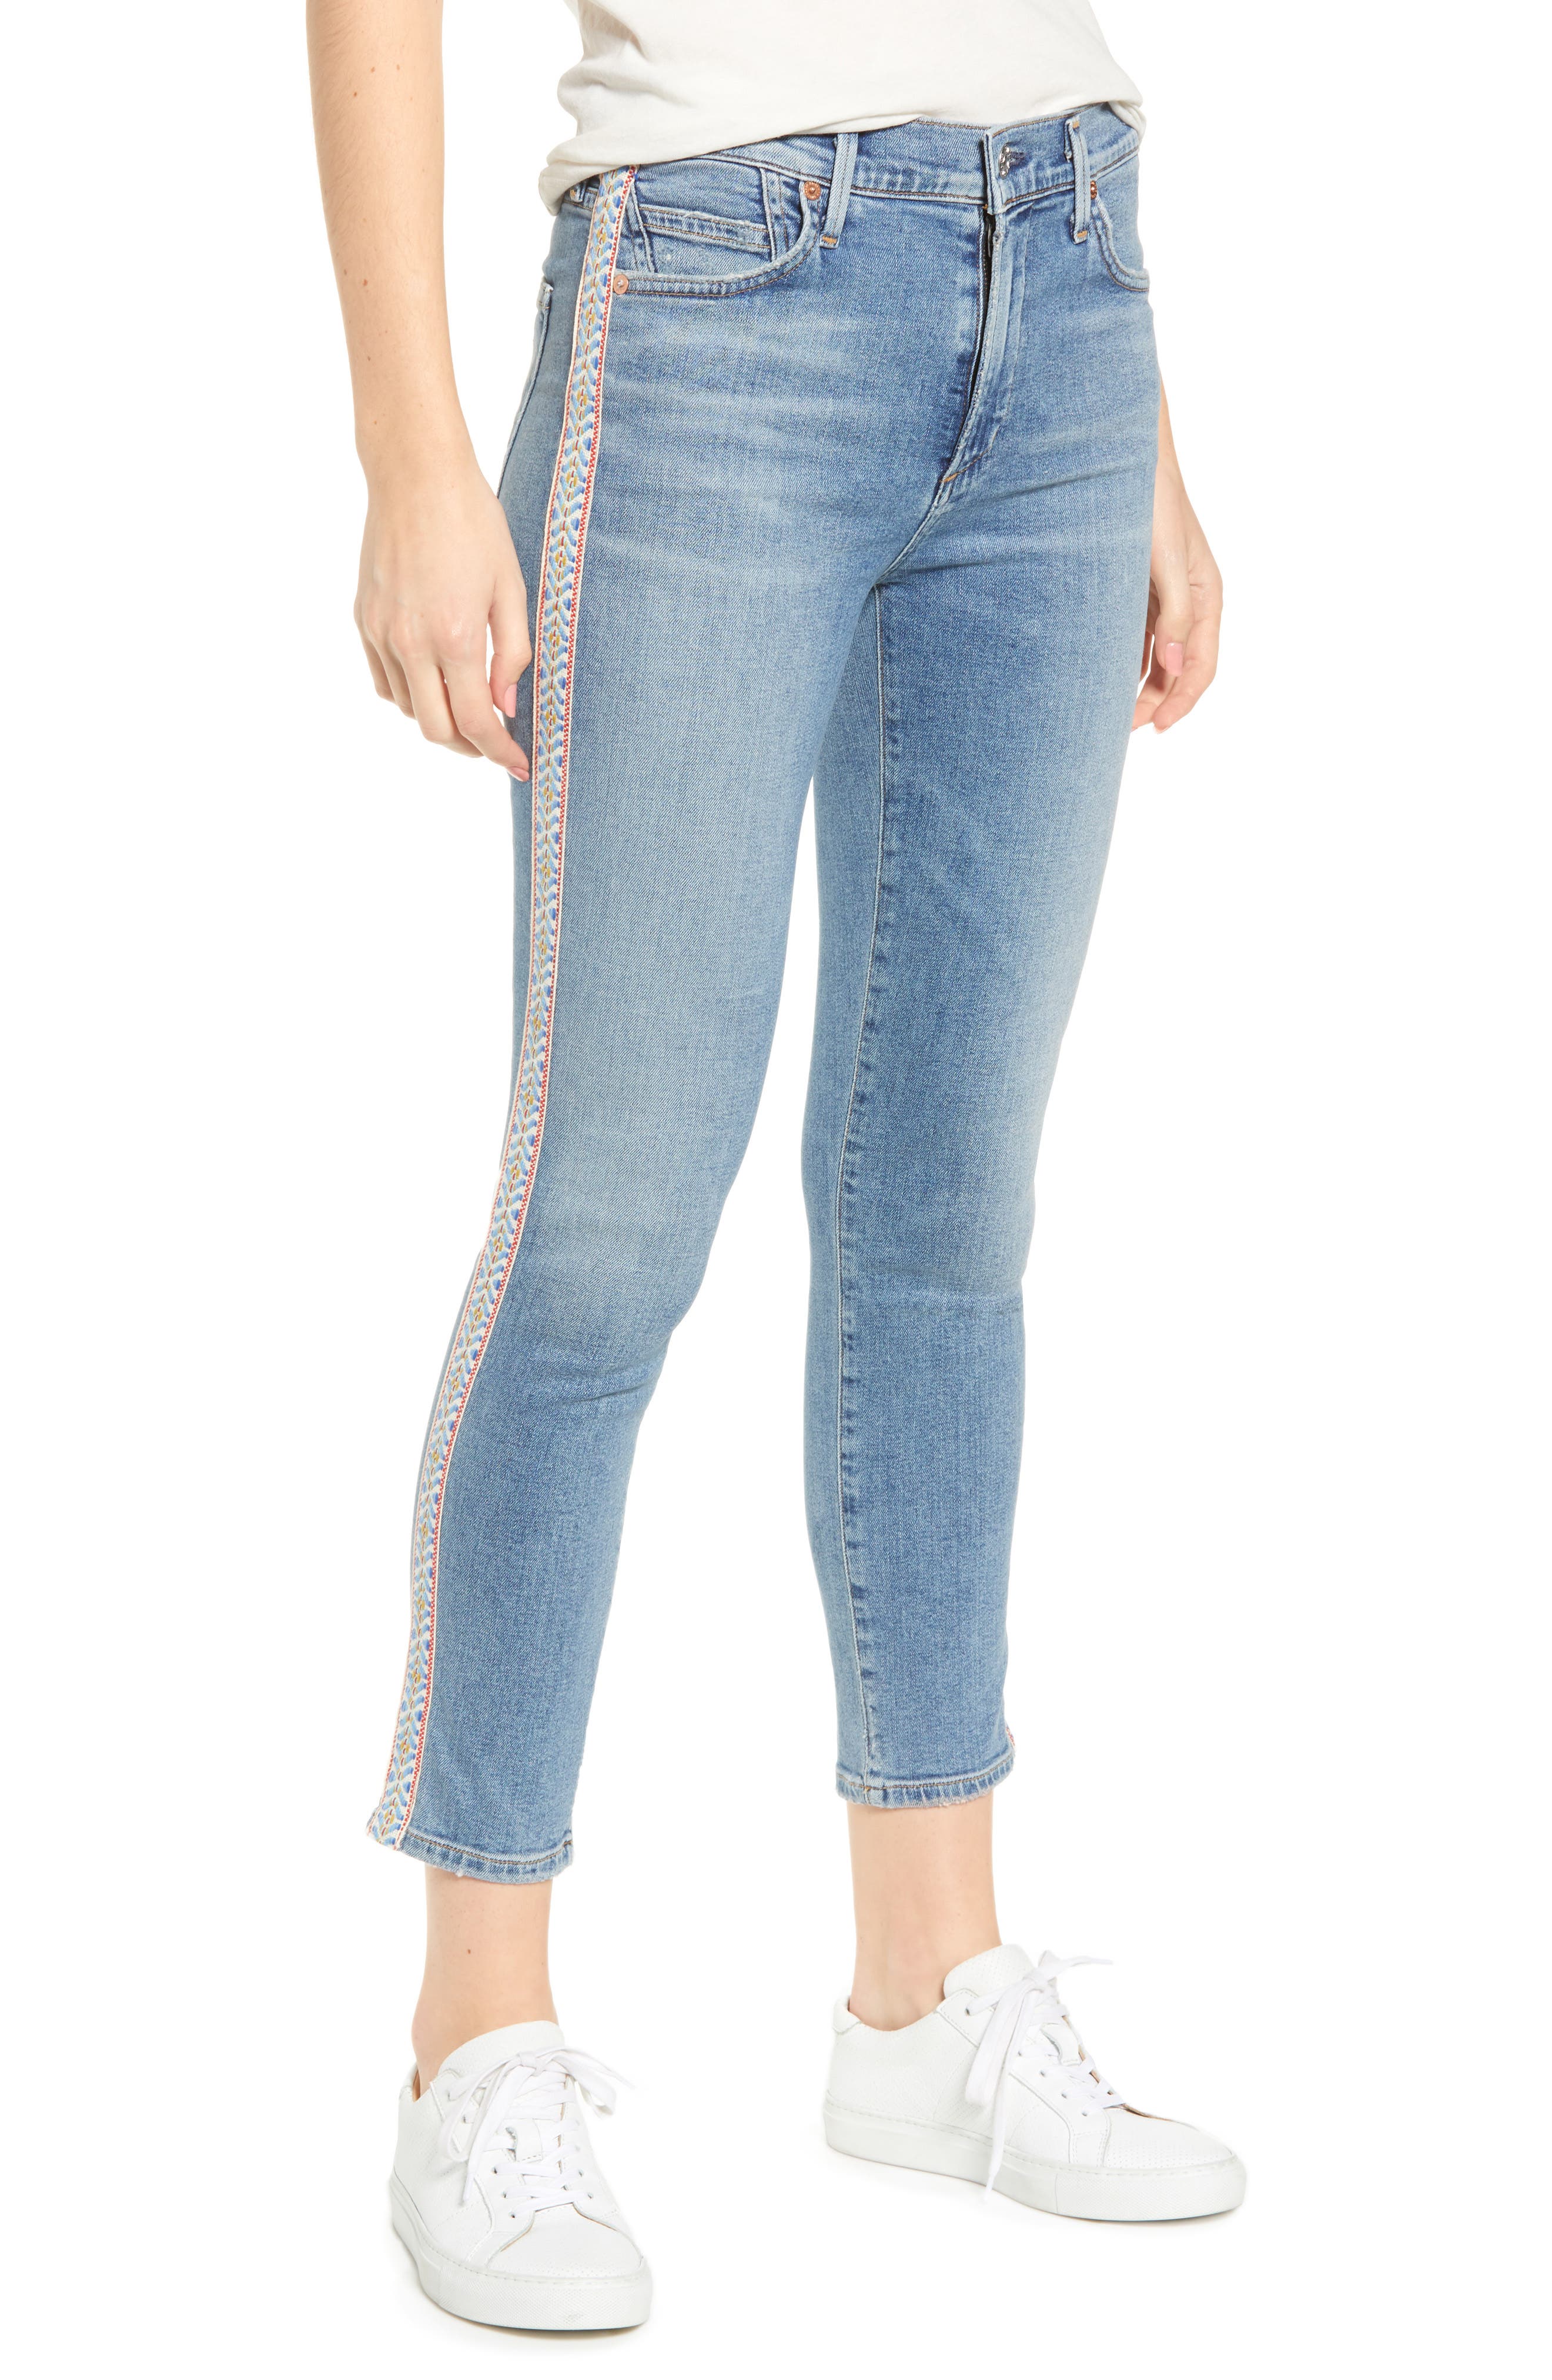 citizens of humanity embroidered jeans